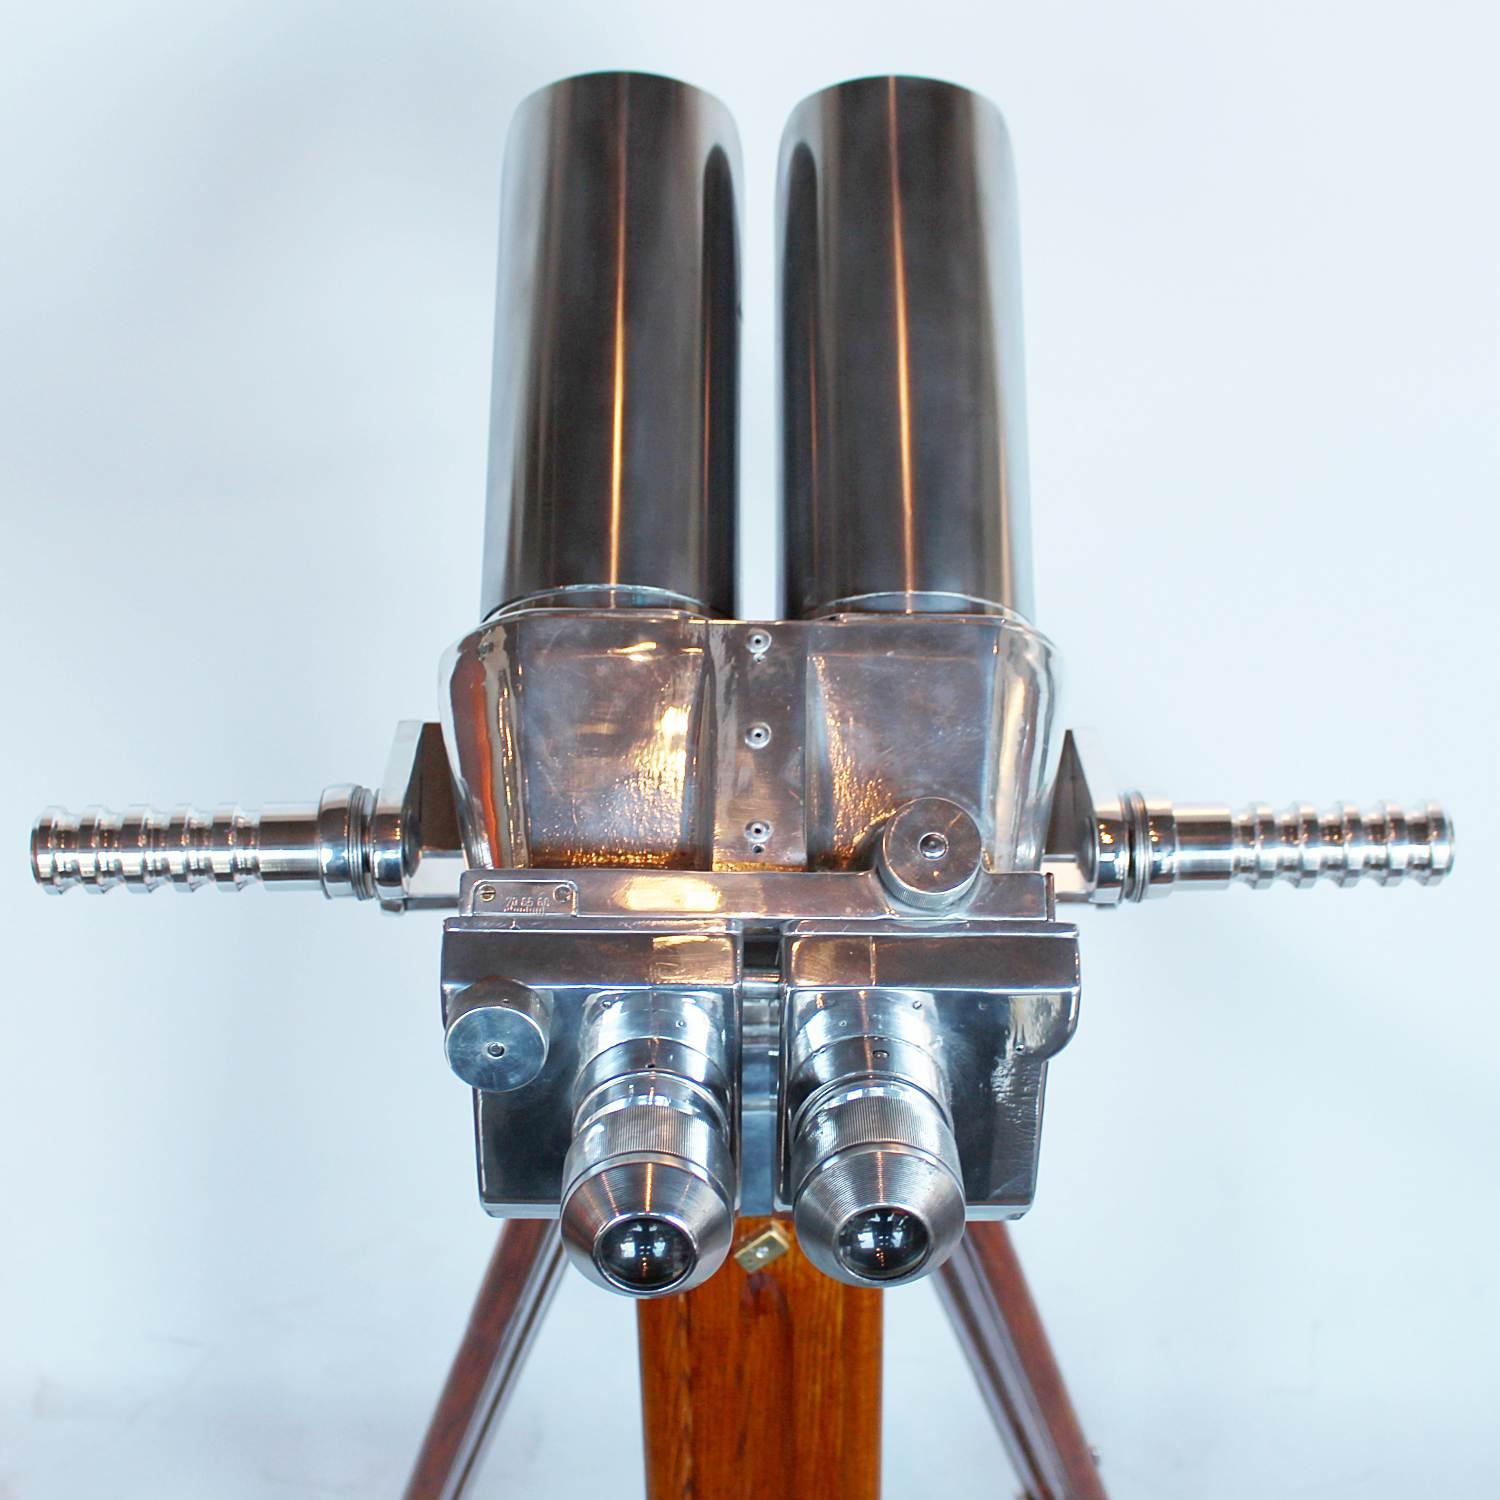 A pair of 10x80 binoculars with eyepieces set at 45 degrees, attributed to Zeiss. Set on period, extending oak and brass stand with chromed conical feet. 10 times magnification with 80mm objective lens.

Paint stripped and metal polished. Fully